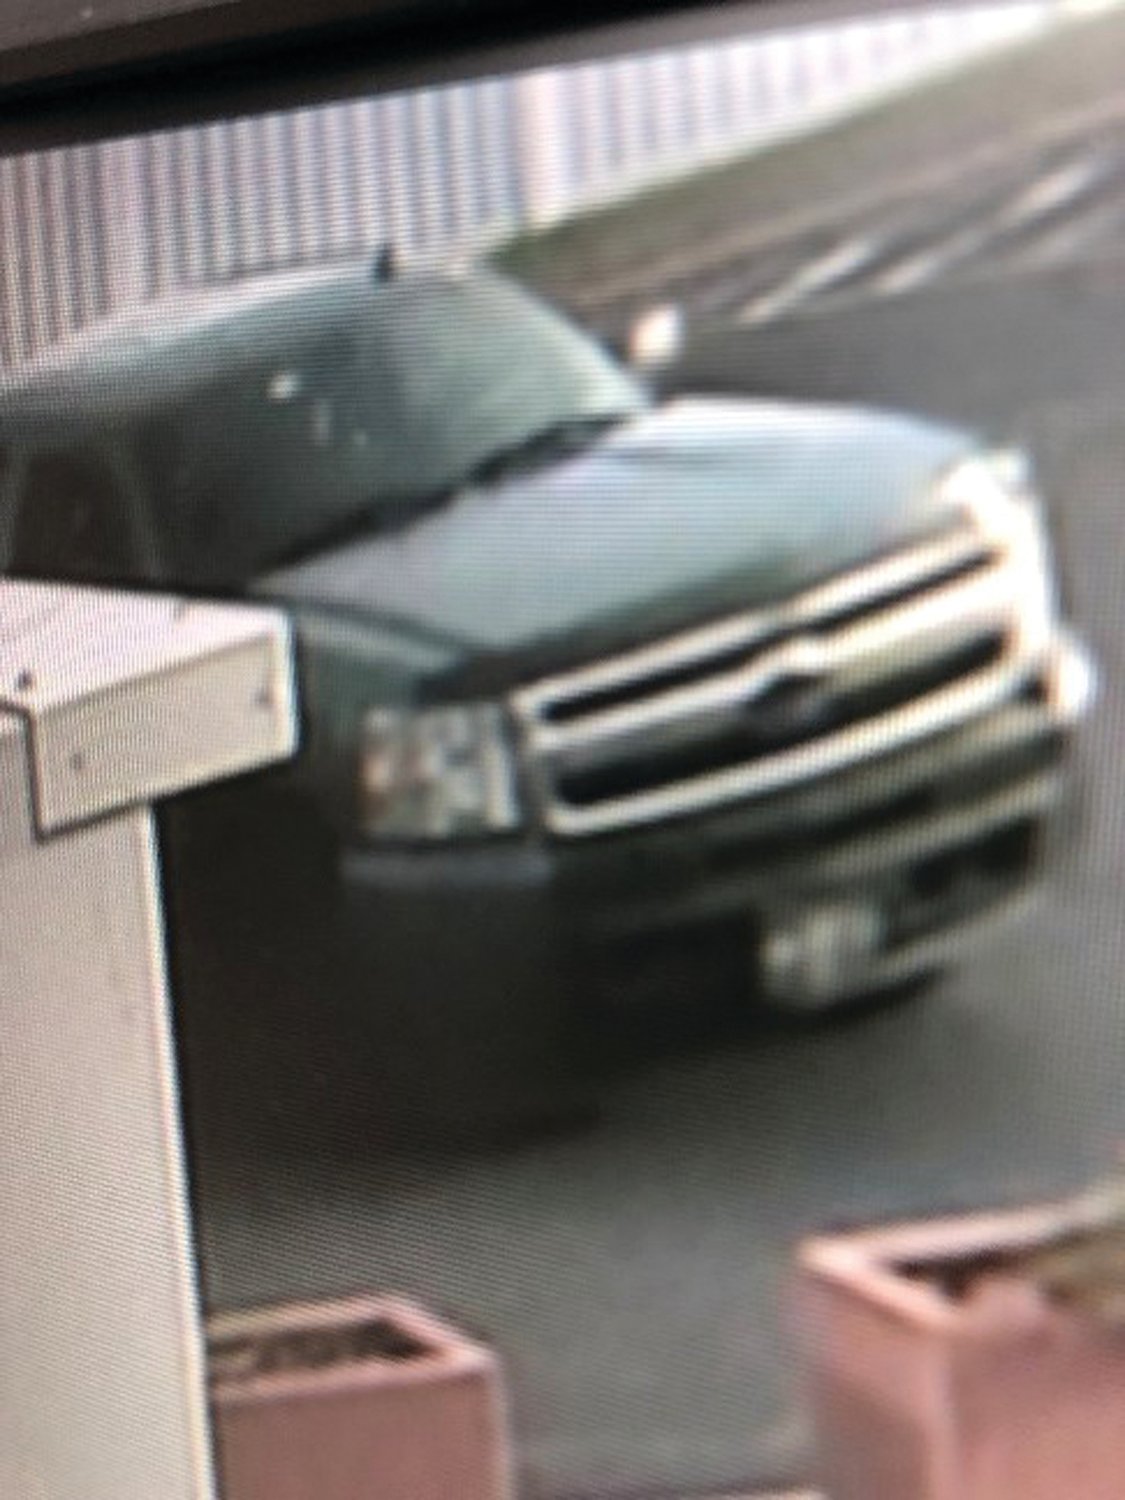 A camera captured a photograph of the front of a truck police believe was involved in a fatal hit and run in Bristol Township Sunday.